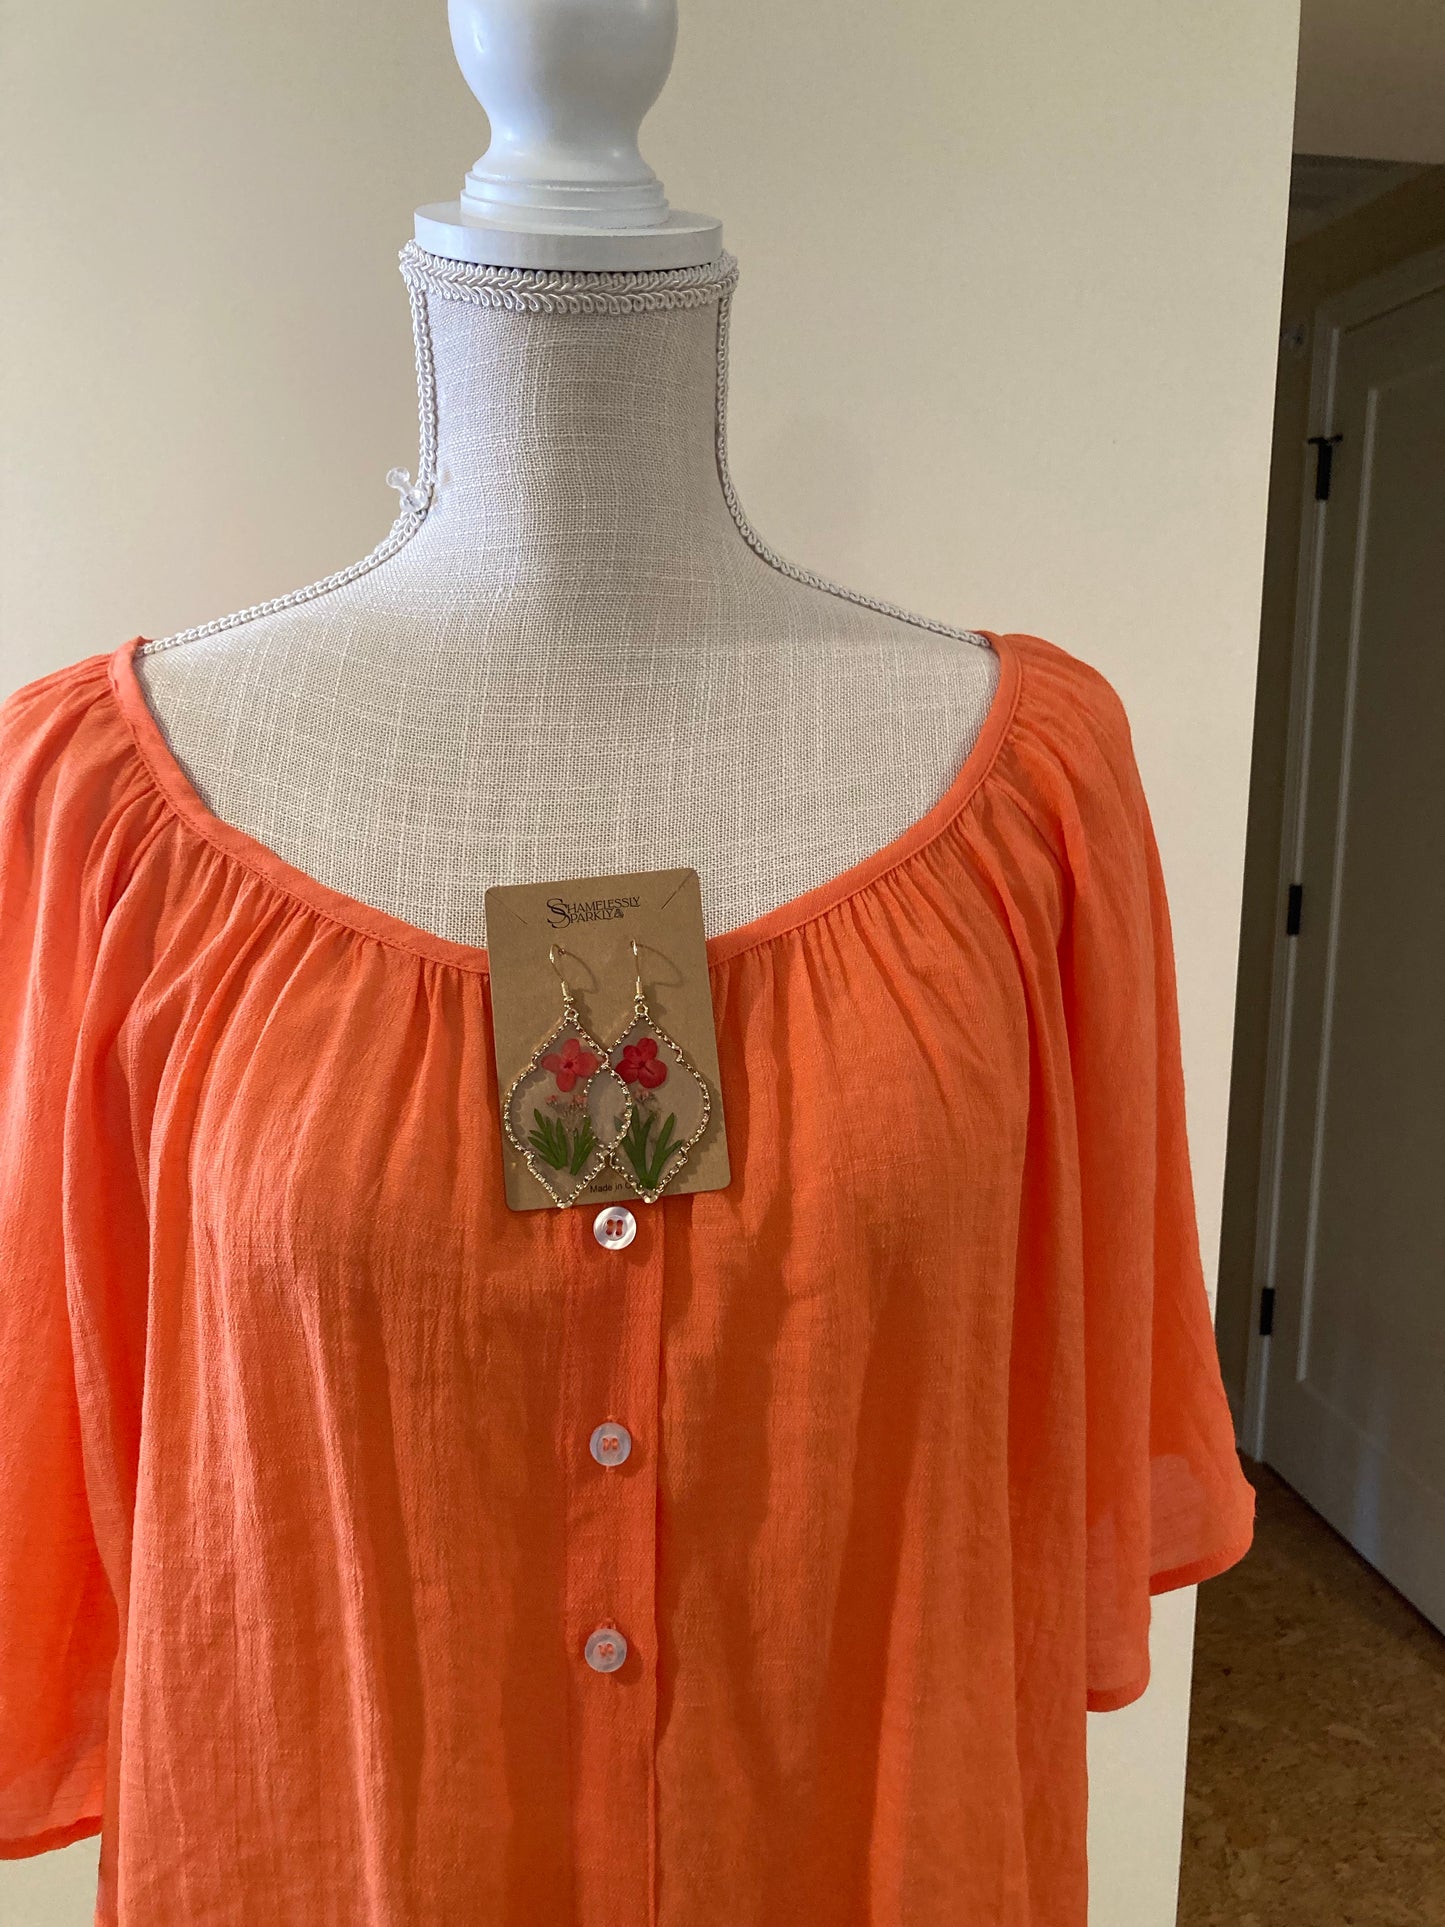 Button Gathered Summer Blouse - Color is Tangerine